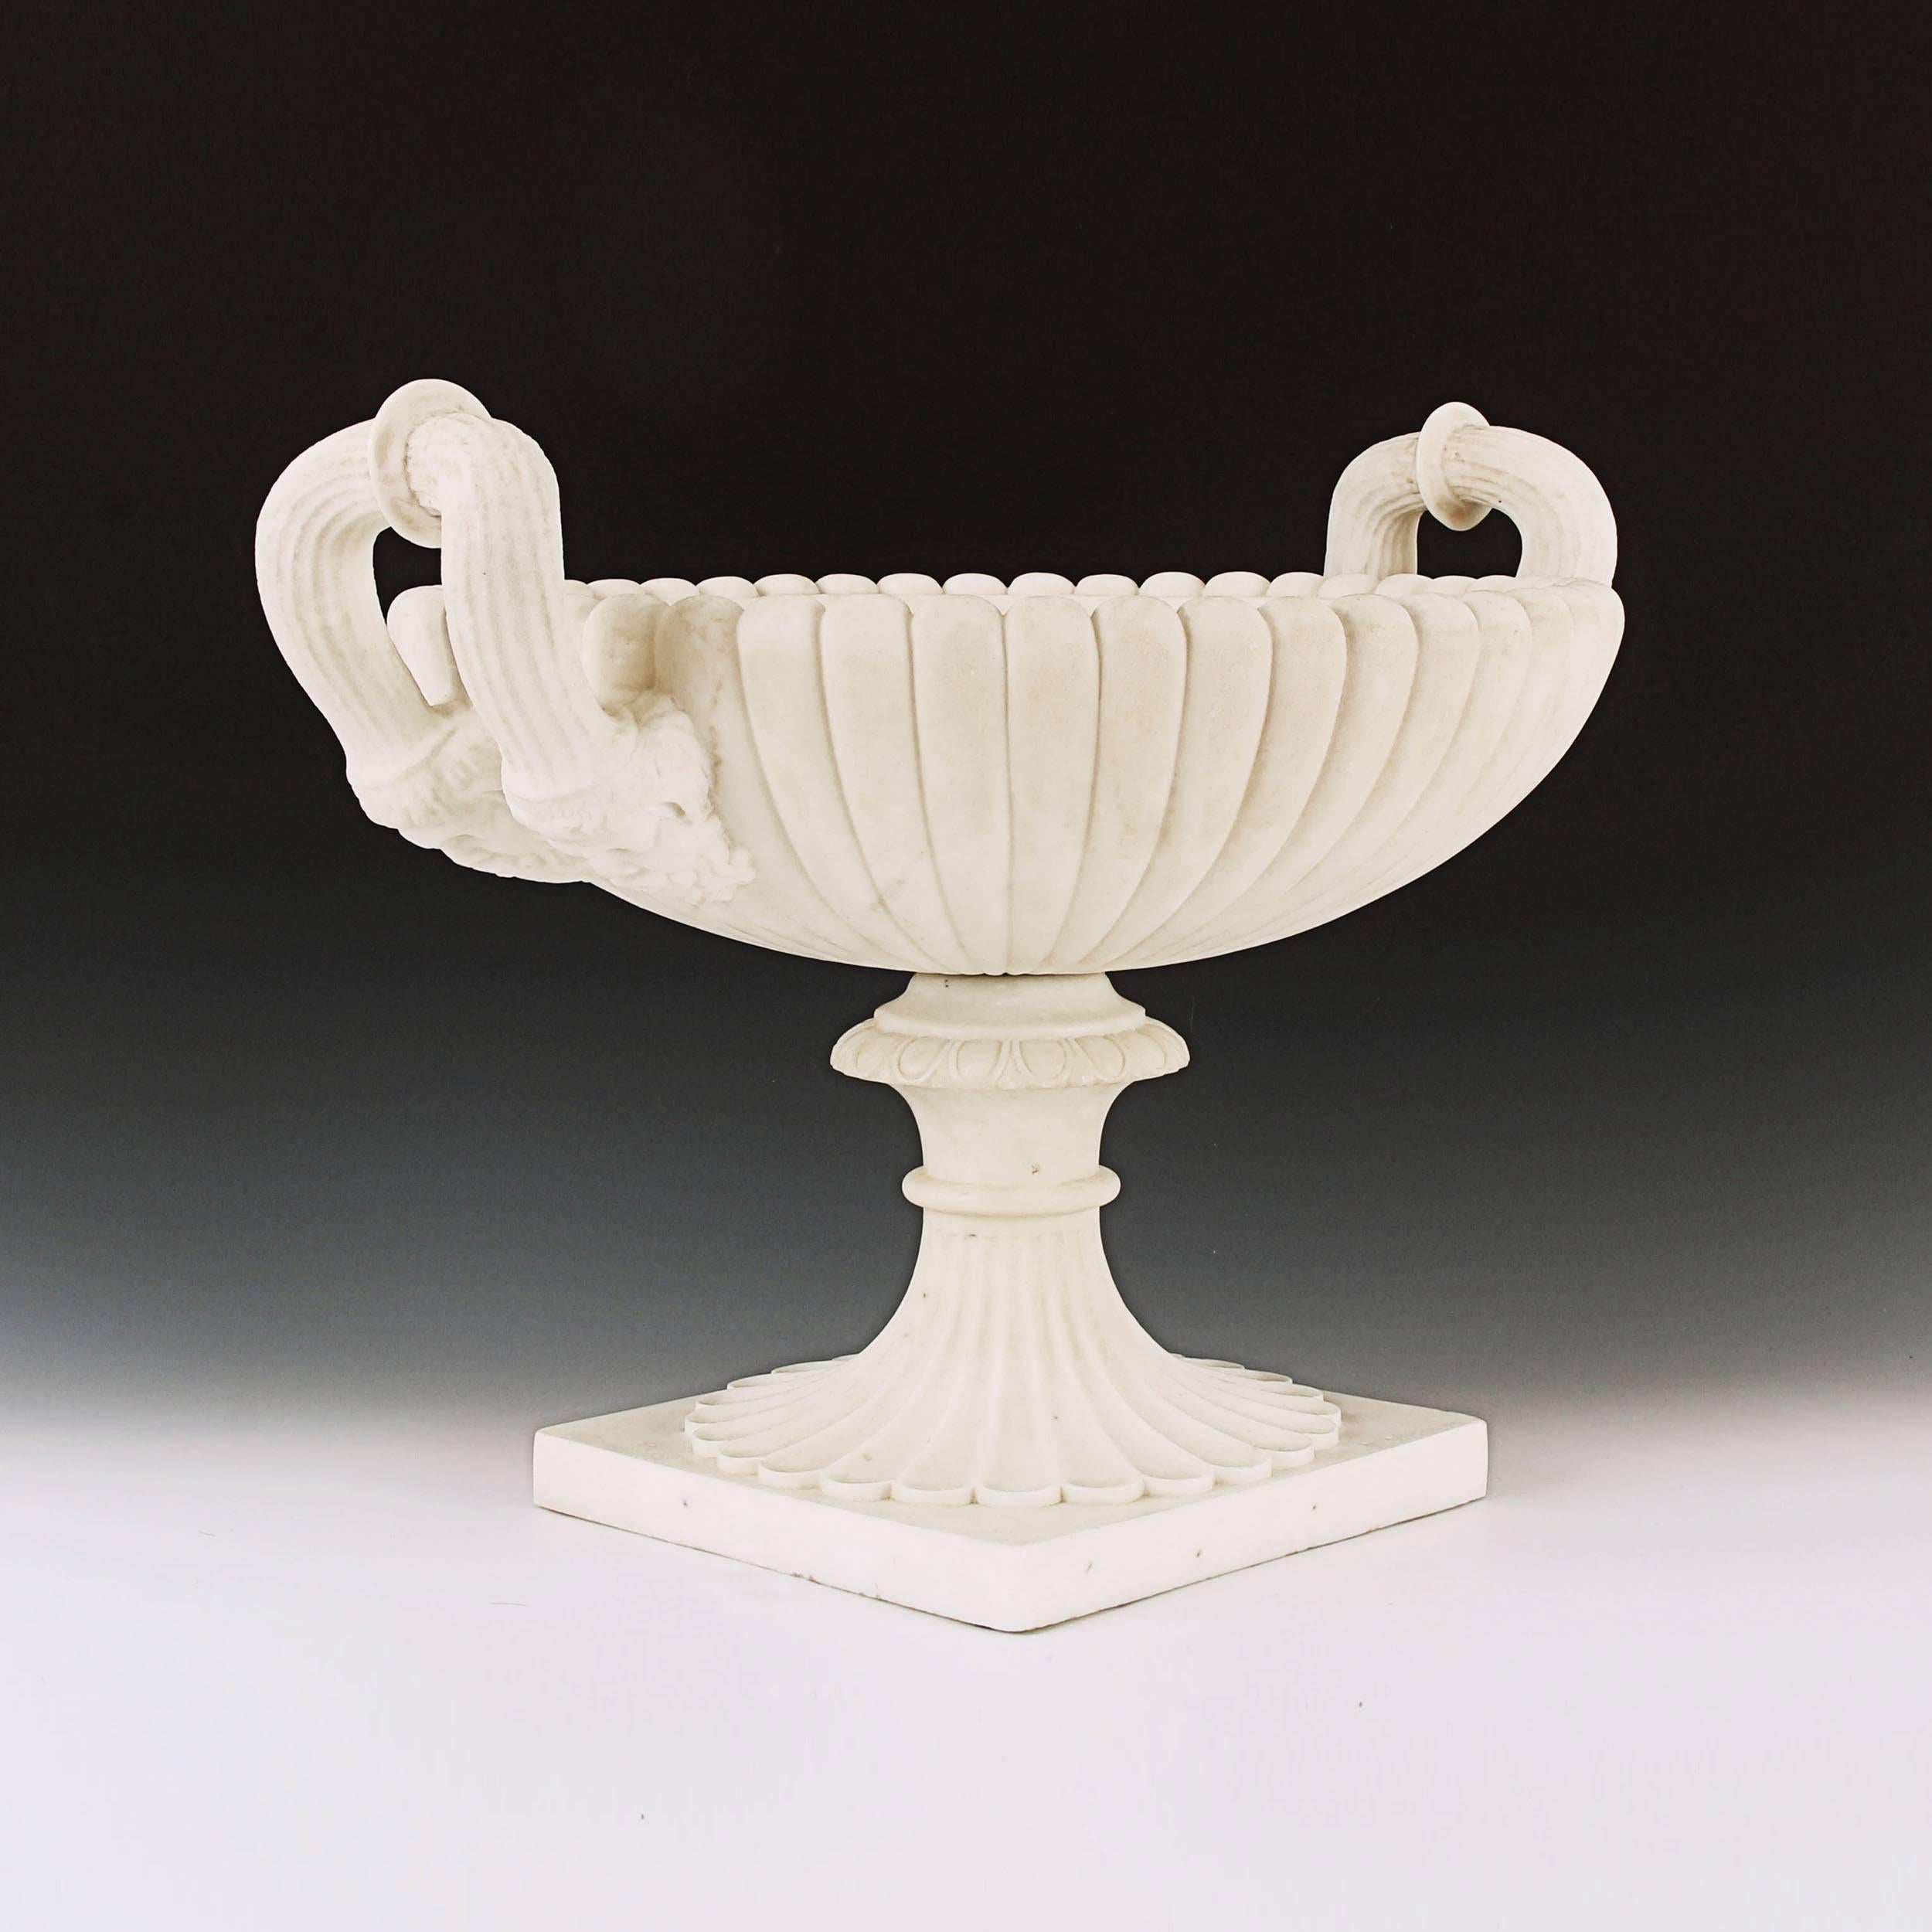 This elegant and refined masterpiece, carved from beautiful white marble, draws inspiration from both the ancient Greek Kylix form & Roman Neoclassicism. Carved from two solid sections. The upper gadrooned crater, each side with generously